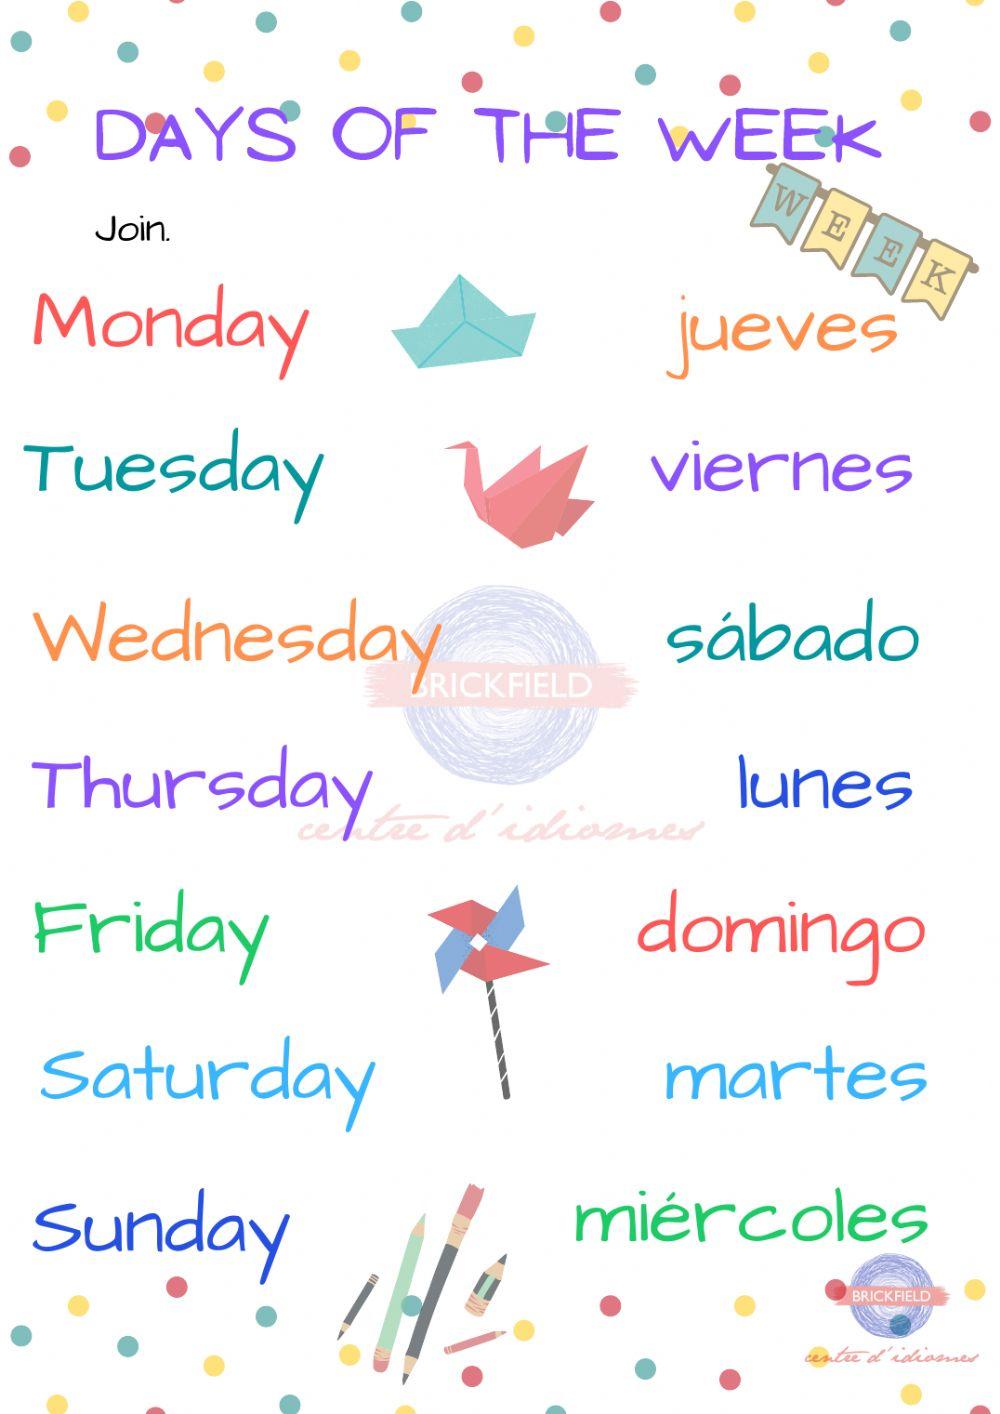 Days of the week. Join